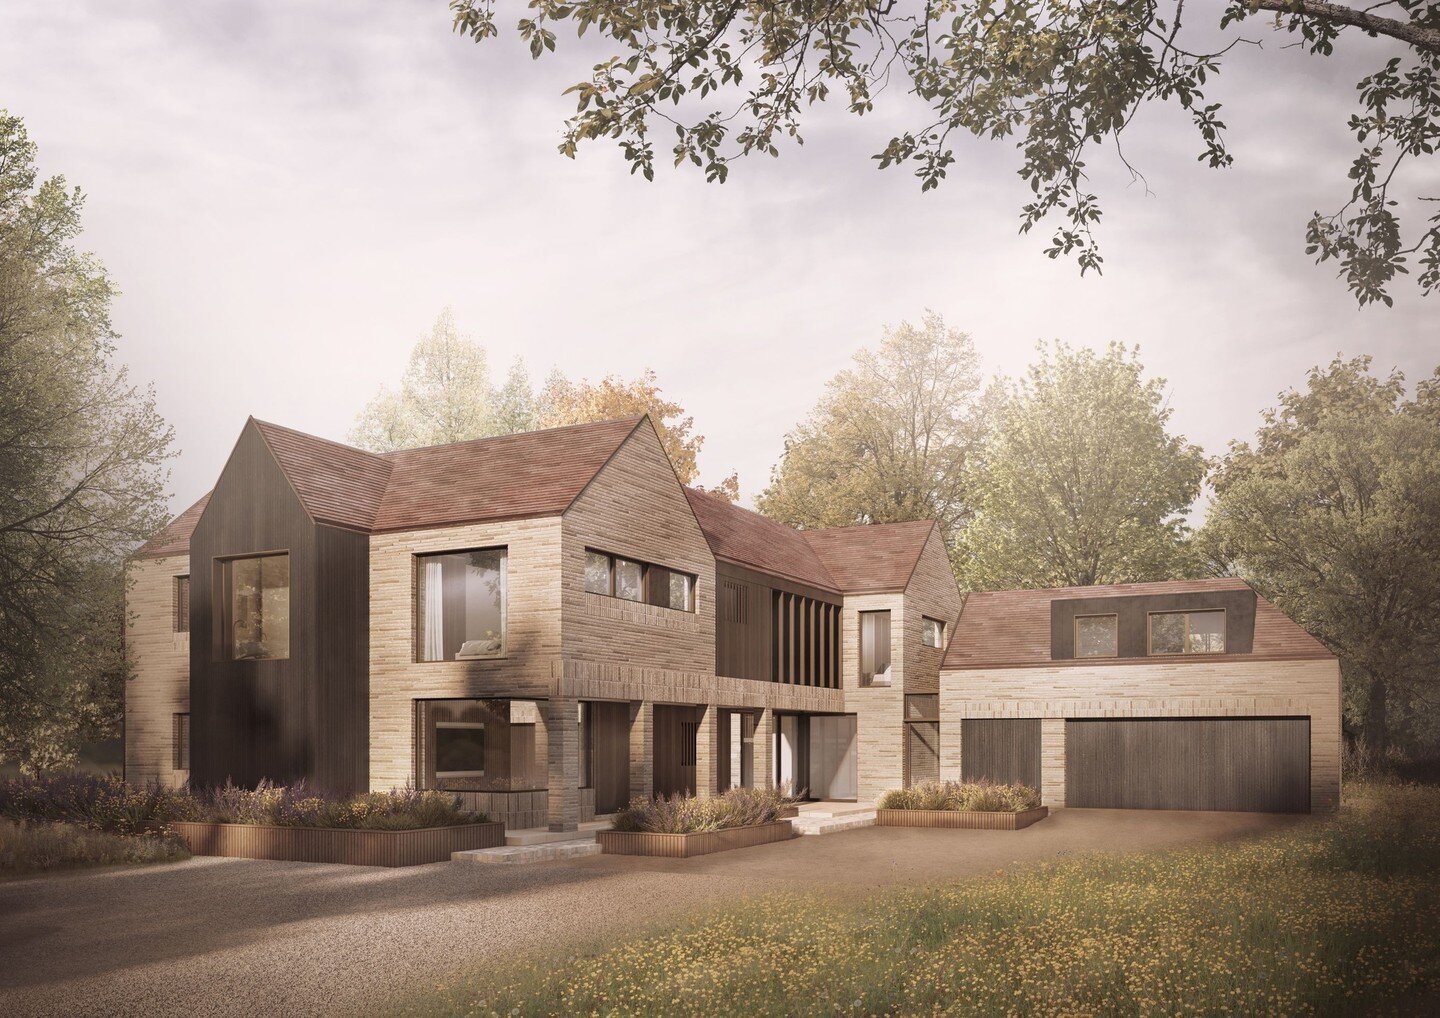 On a site located in East Hertfordshire, and within the Green Belt, Marjoram Architects were commissioned to design a new five bedroom family home. The new house creates a contemporary yet sympathetic response to the green and open site.⁠
⁠
Light col